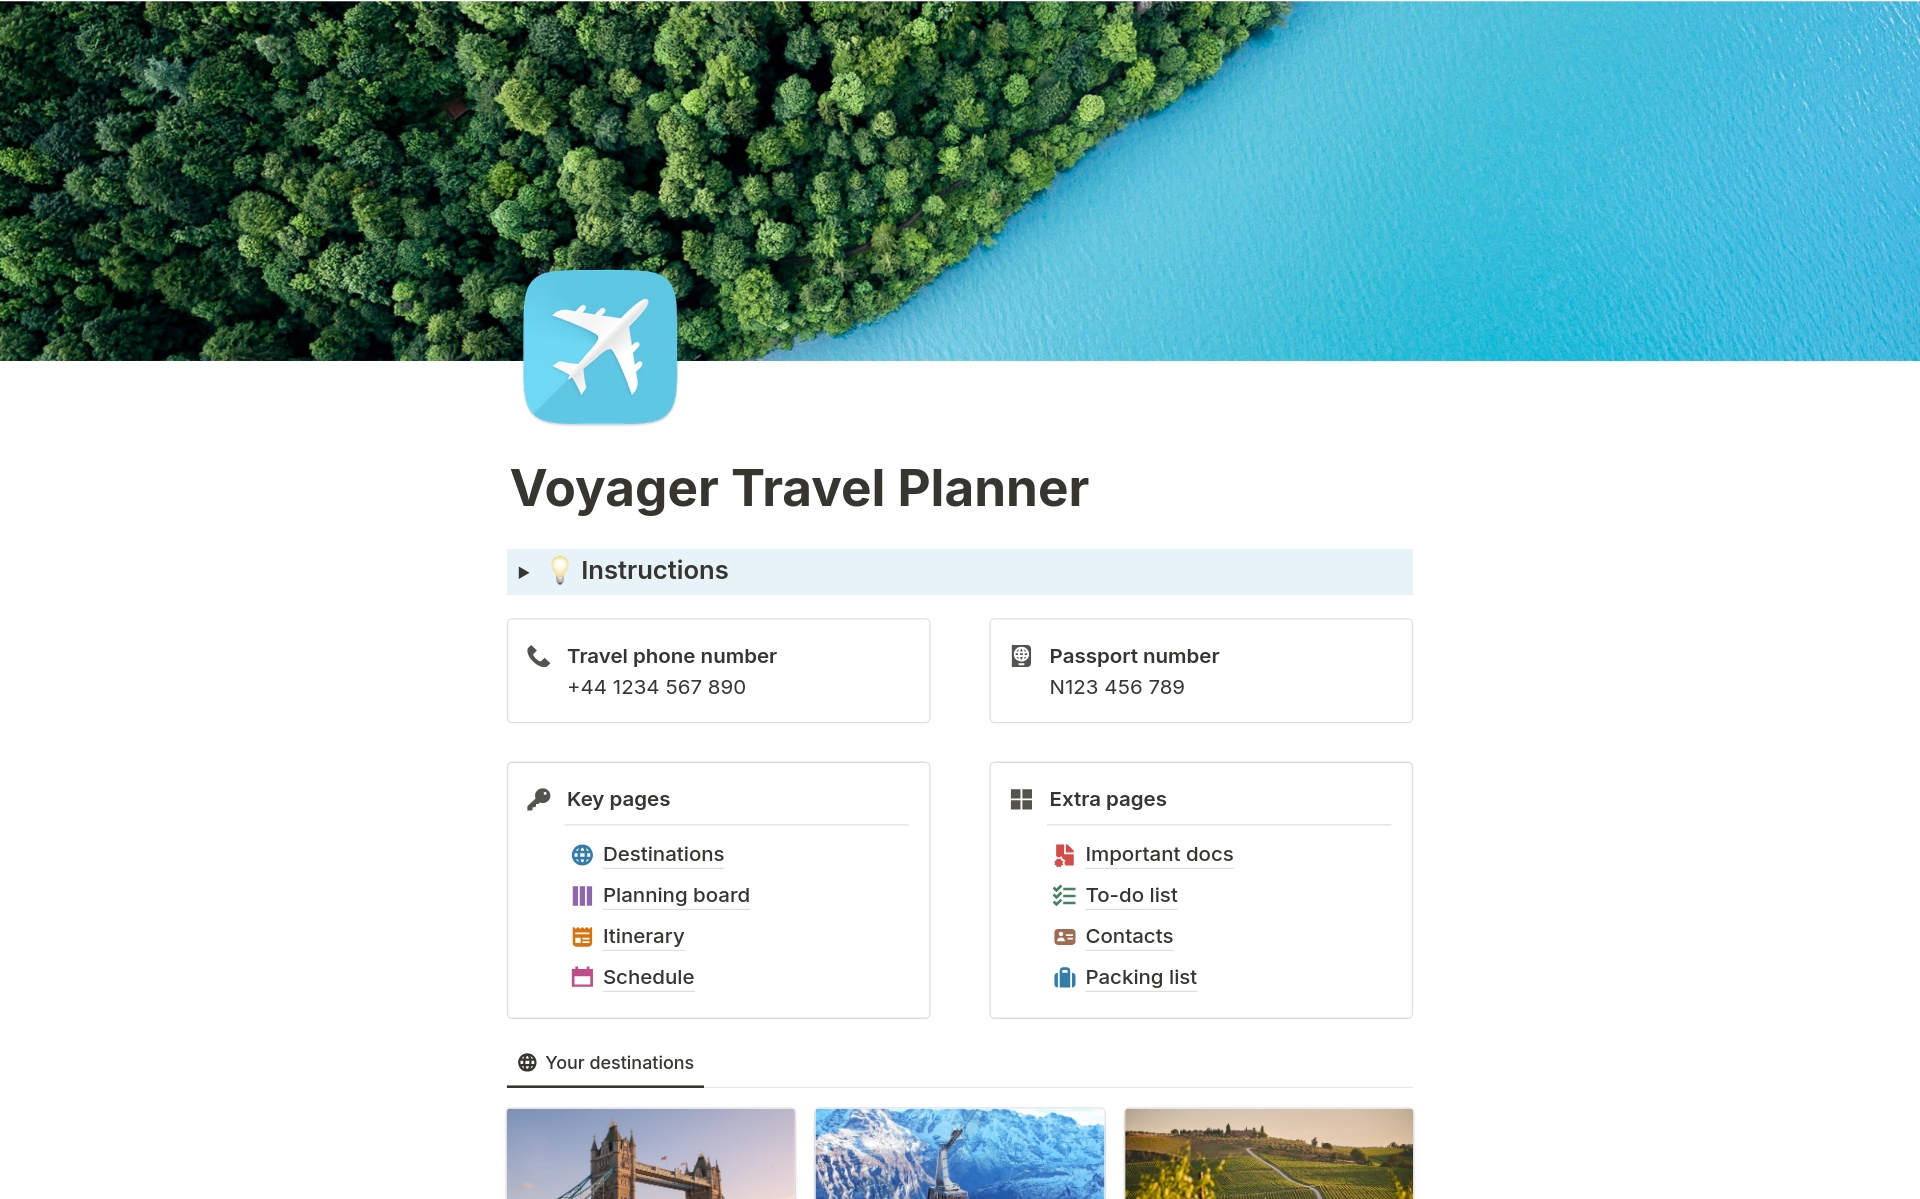 No more travel planning stress! Voyager Travel Planner makes travel planning fun and helps you create an unforgettable trip.